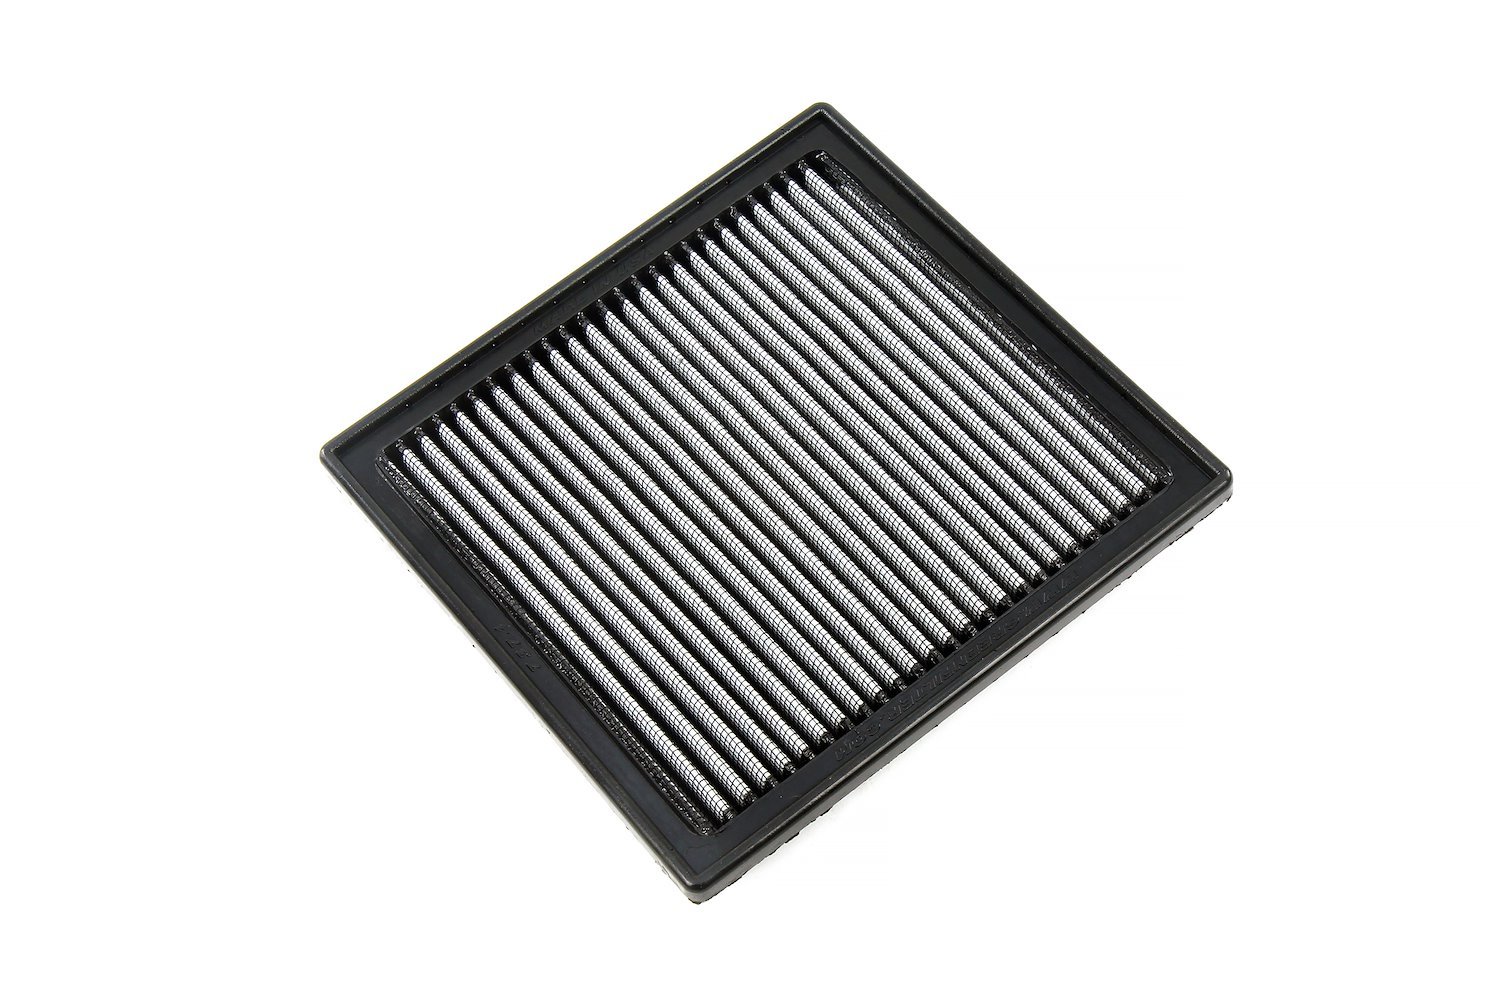 HPS-457374 Performance Drop-In Air Filter, Directly Replaces OEM Drop-In Panel Filter, Improves Performance & Fuel Economy